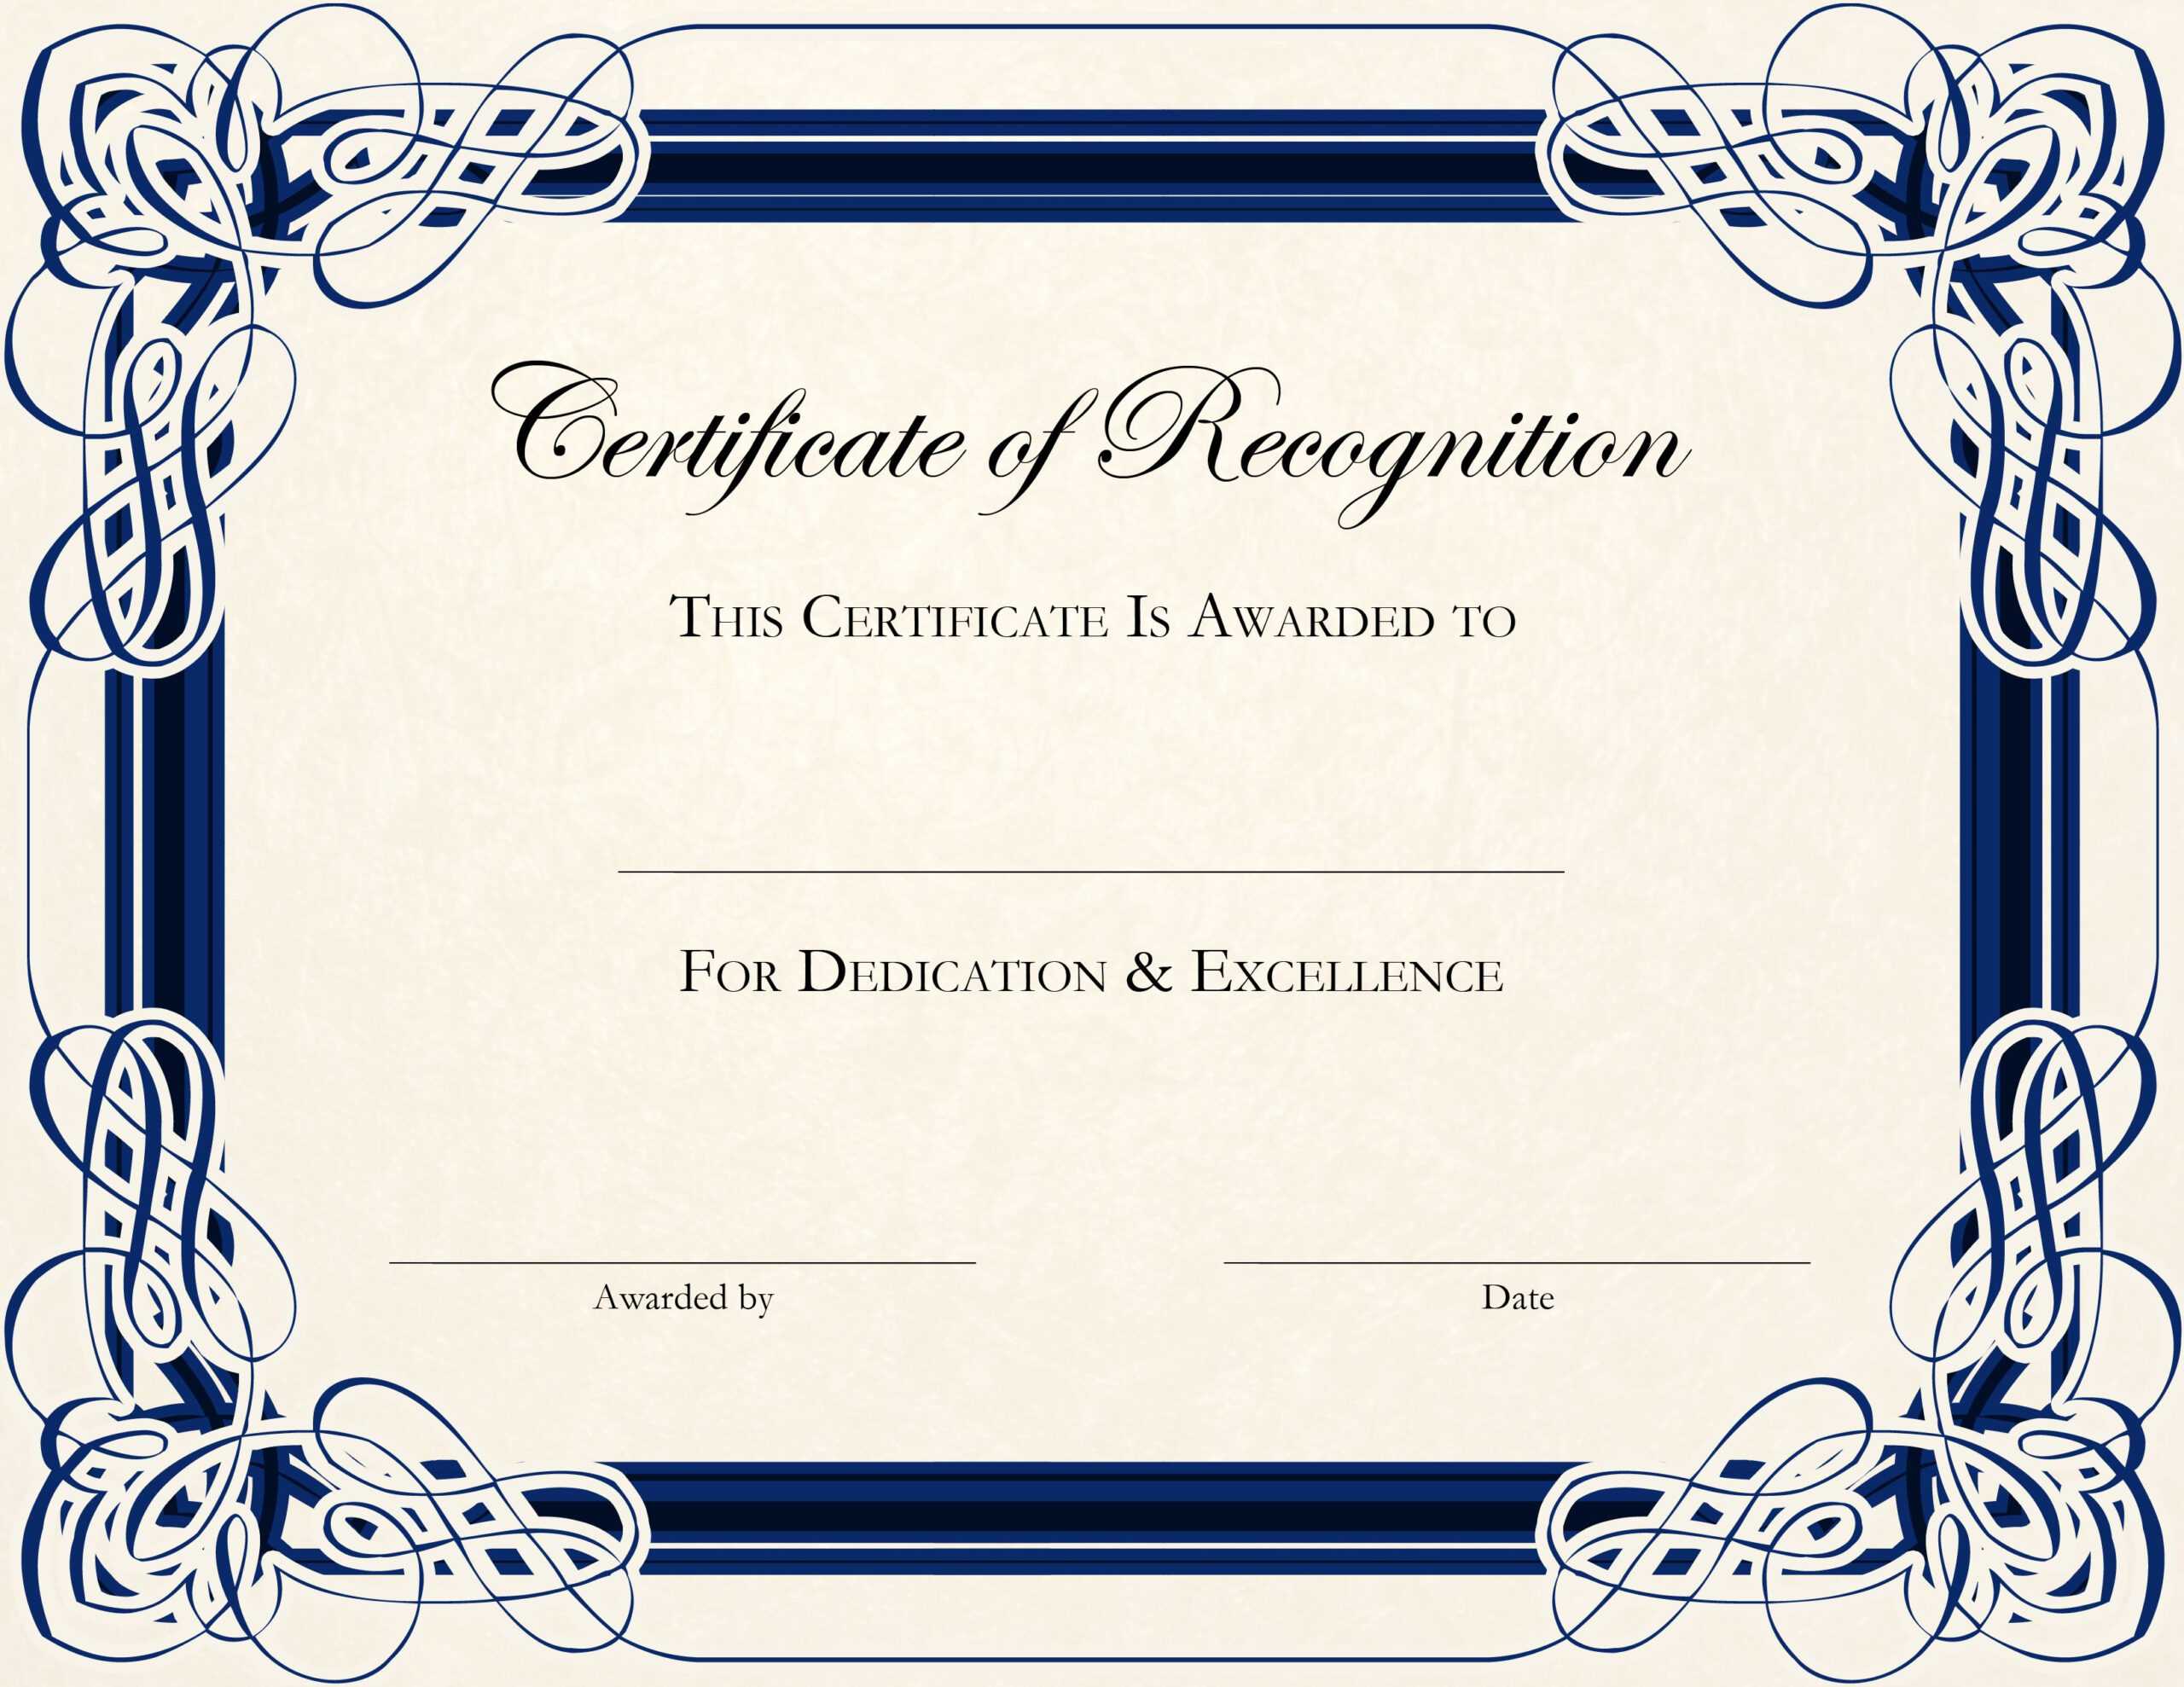 Certificate Of Appreciation Template Word Doc – Calep With Regard To Certificate Of Excellence Template Word